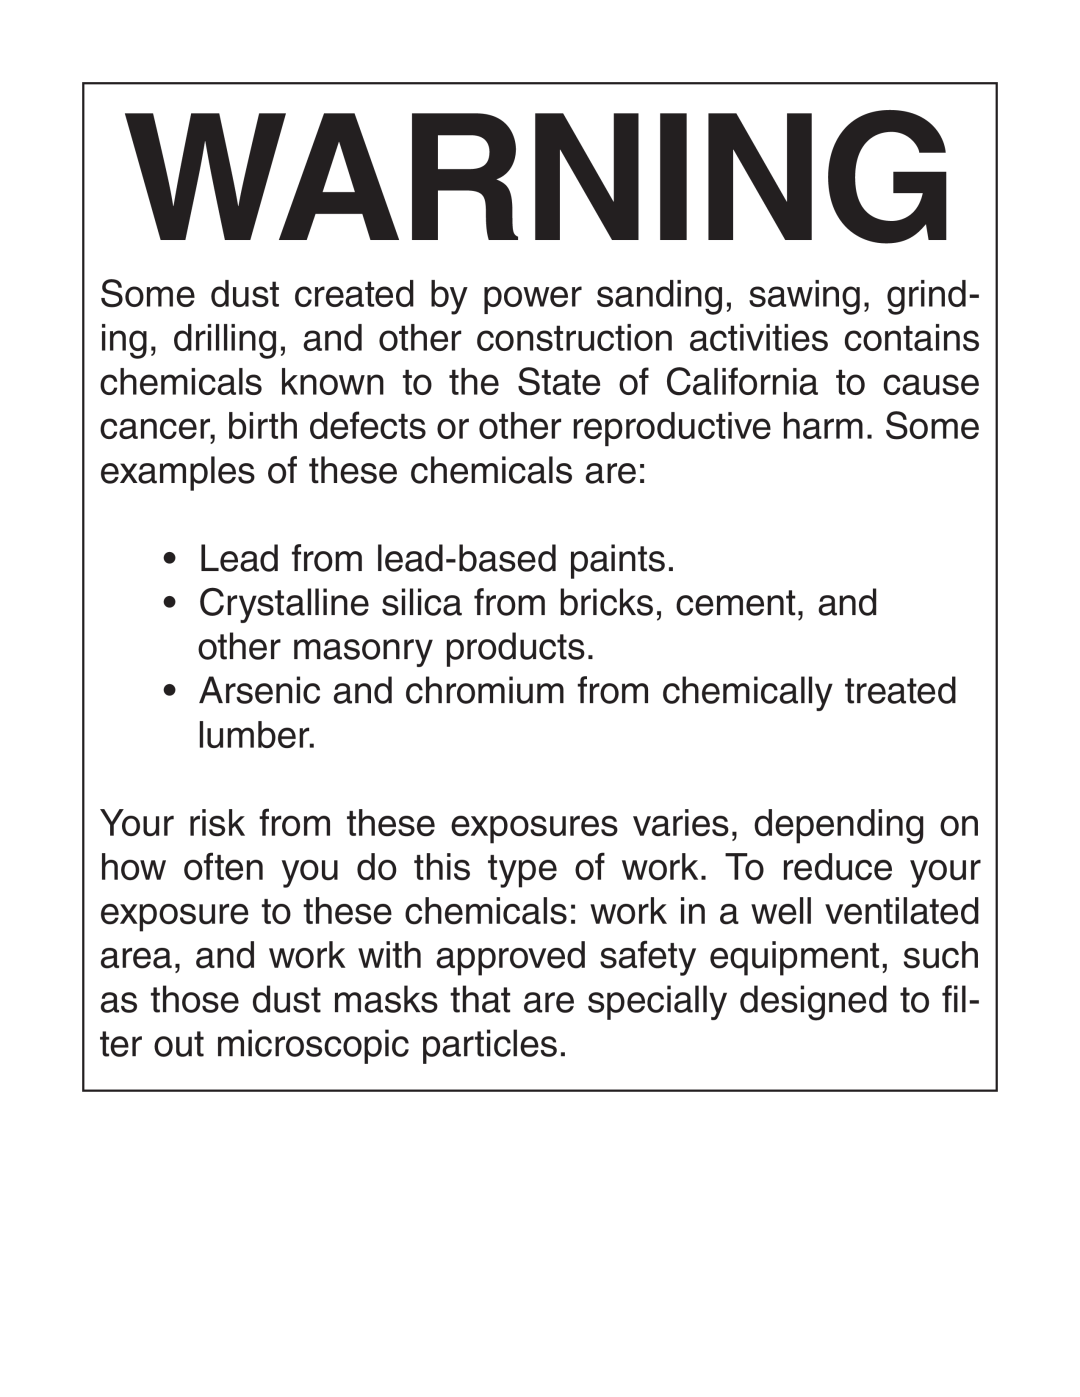 Grizzly G0573 instruction manual Lead from lead-basedpaints 